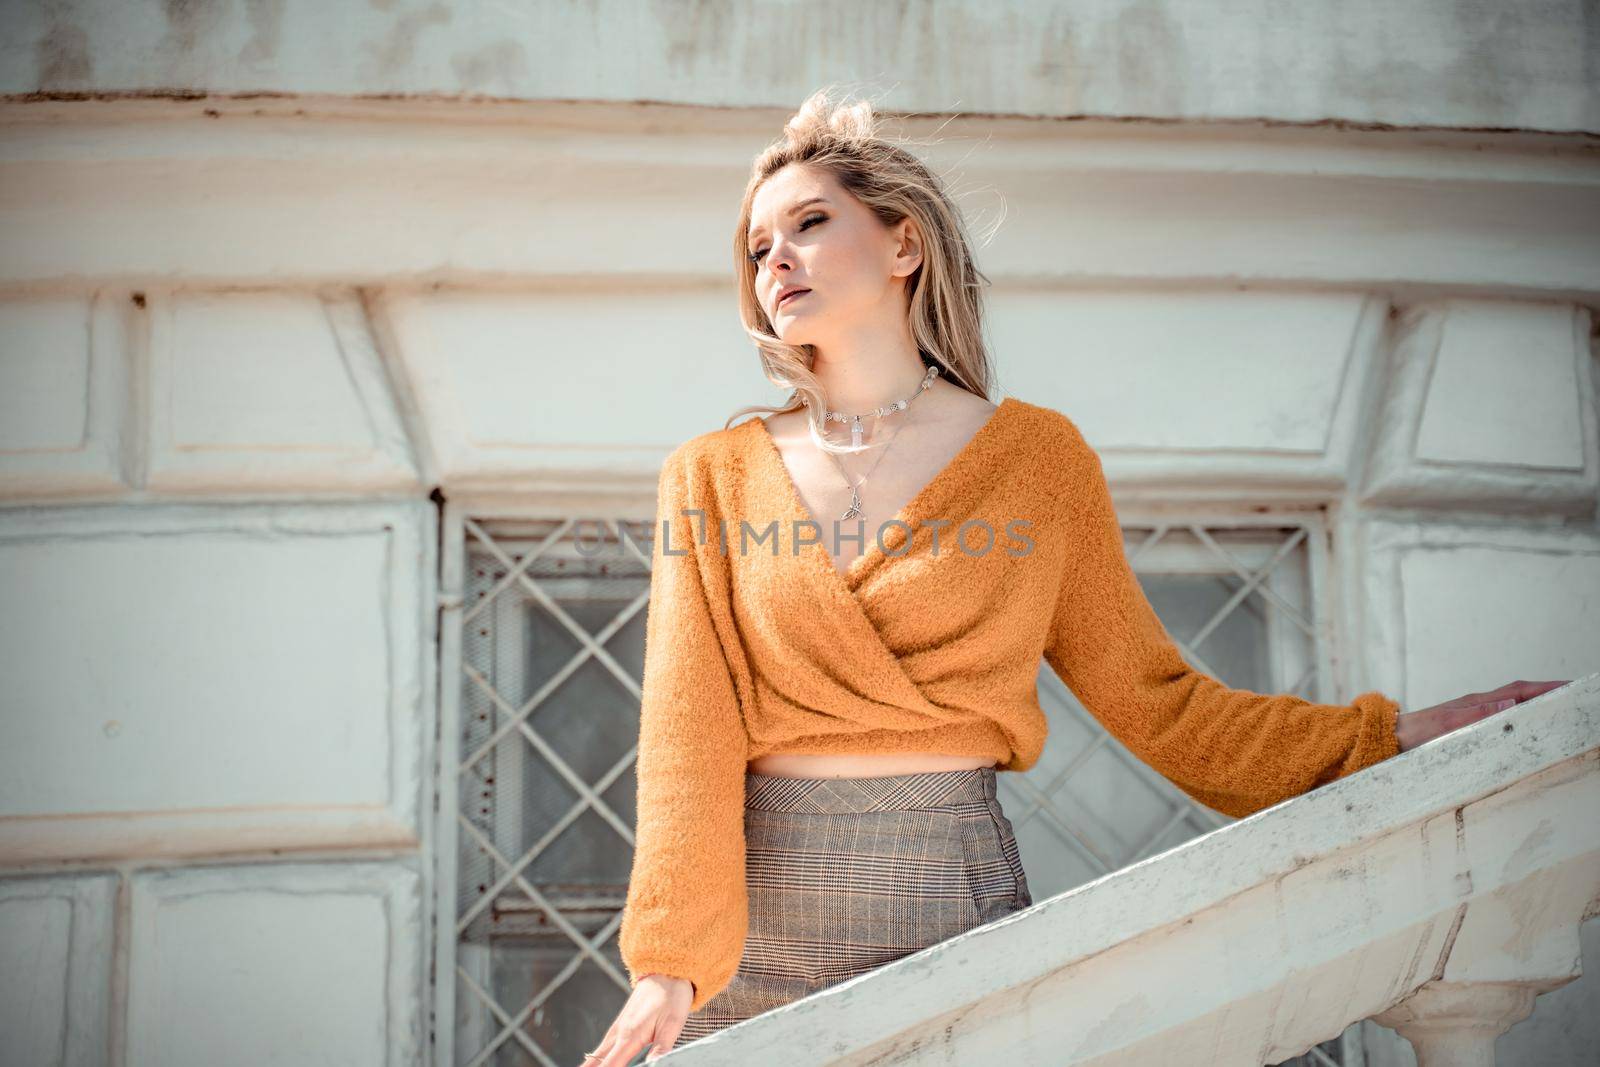 A middle-aged woman looks like a good blonde with curly beautiful hair and makeup on the background of the building. She is wearing a yellow sweater